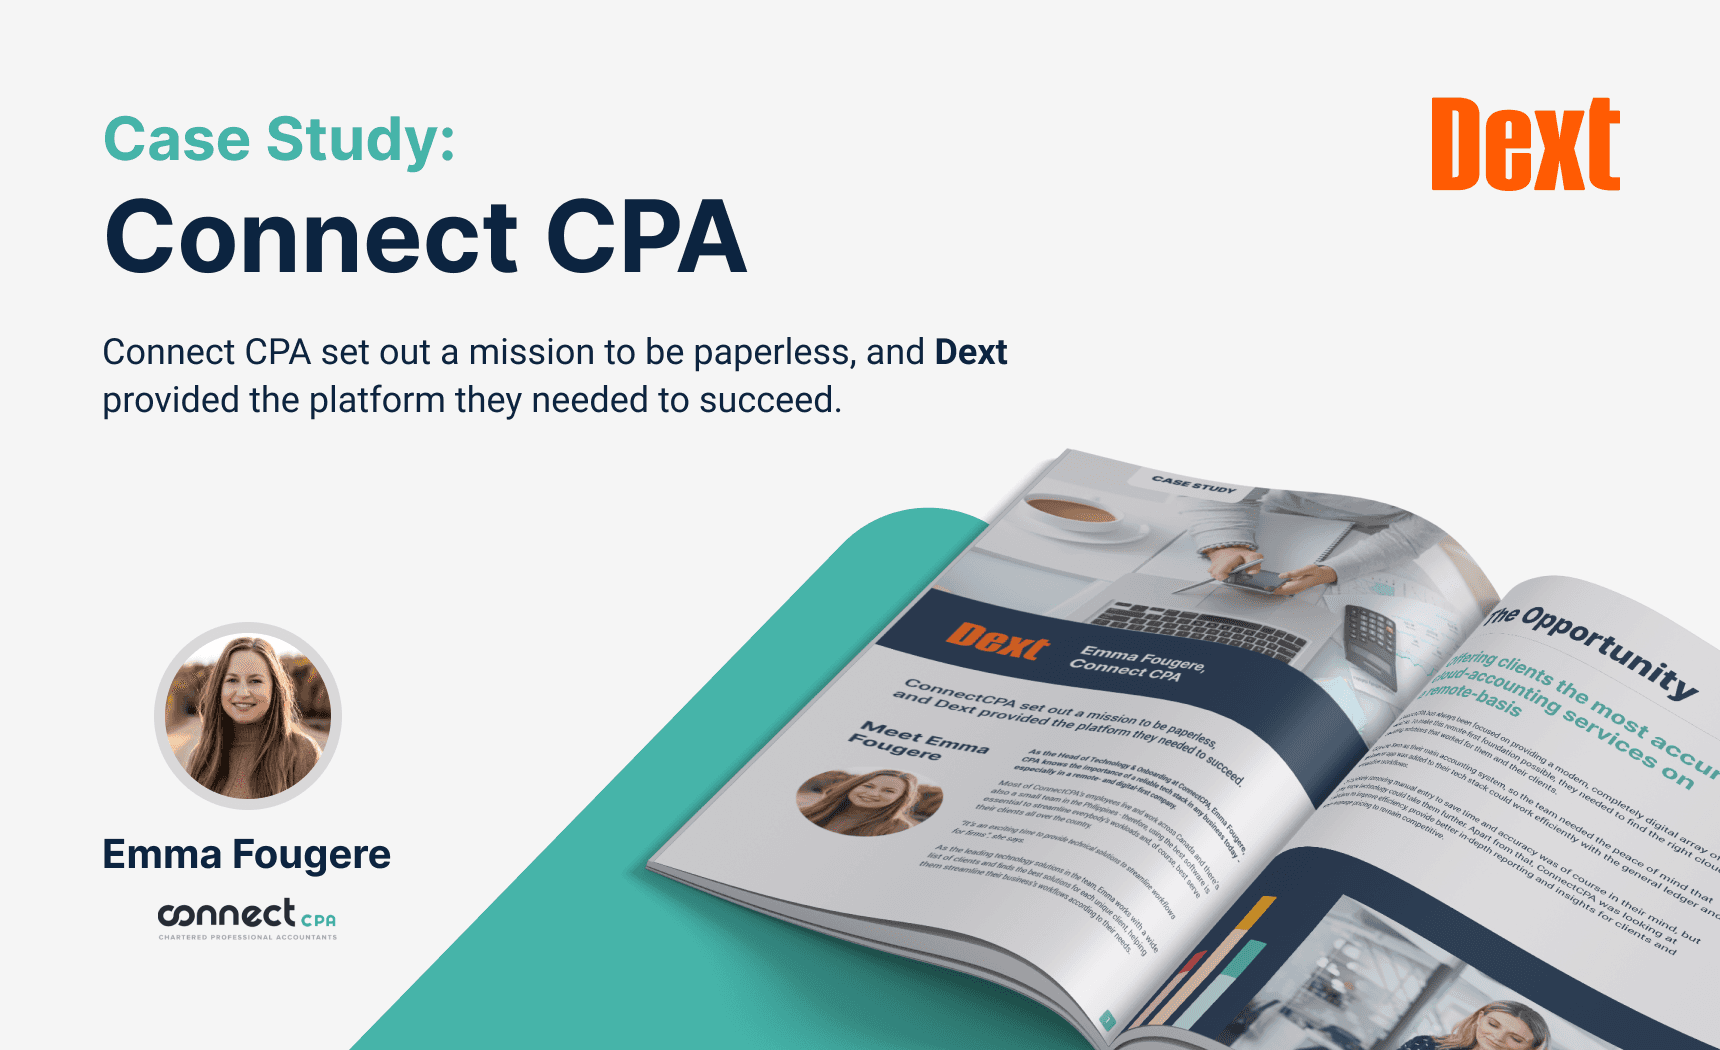 Case Study: Emma Fougere, ConnectCPA